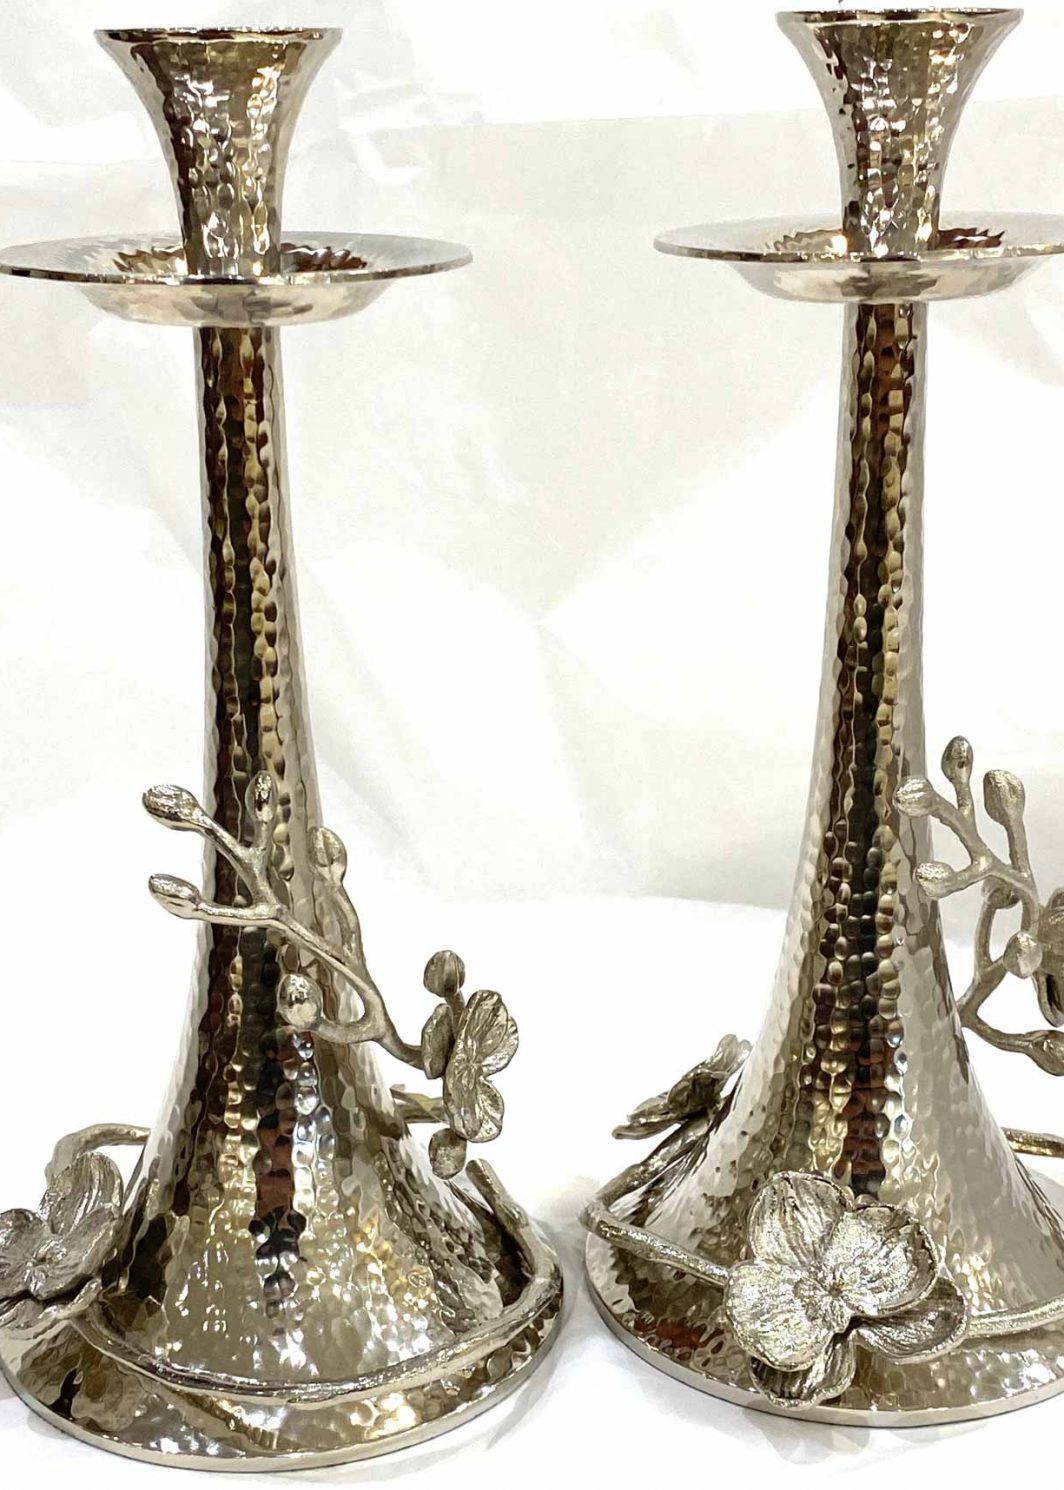 Michael Aram White Orchid Candle Holders